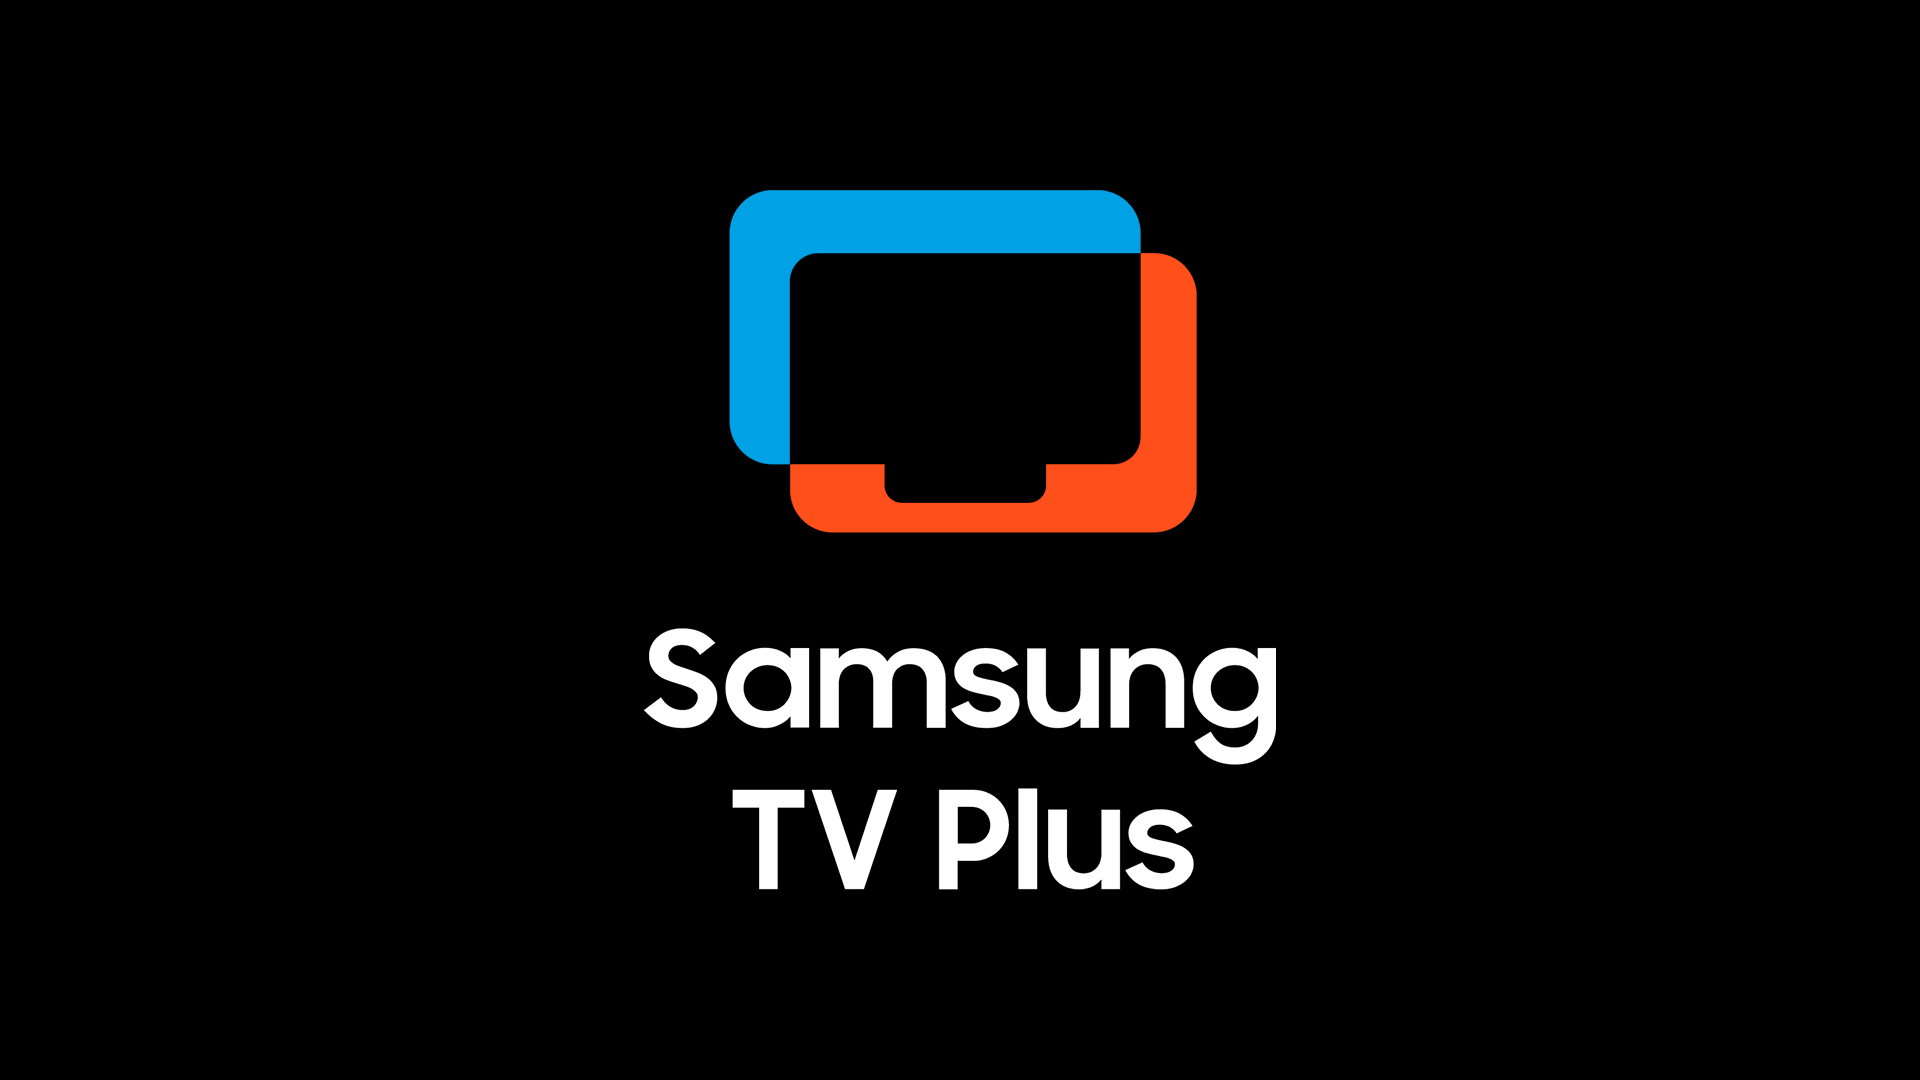 Samsung TV Plus Adds 5 New Free Channels